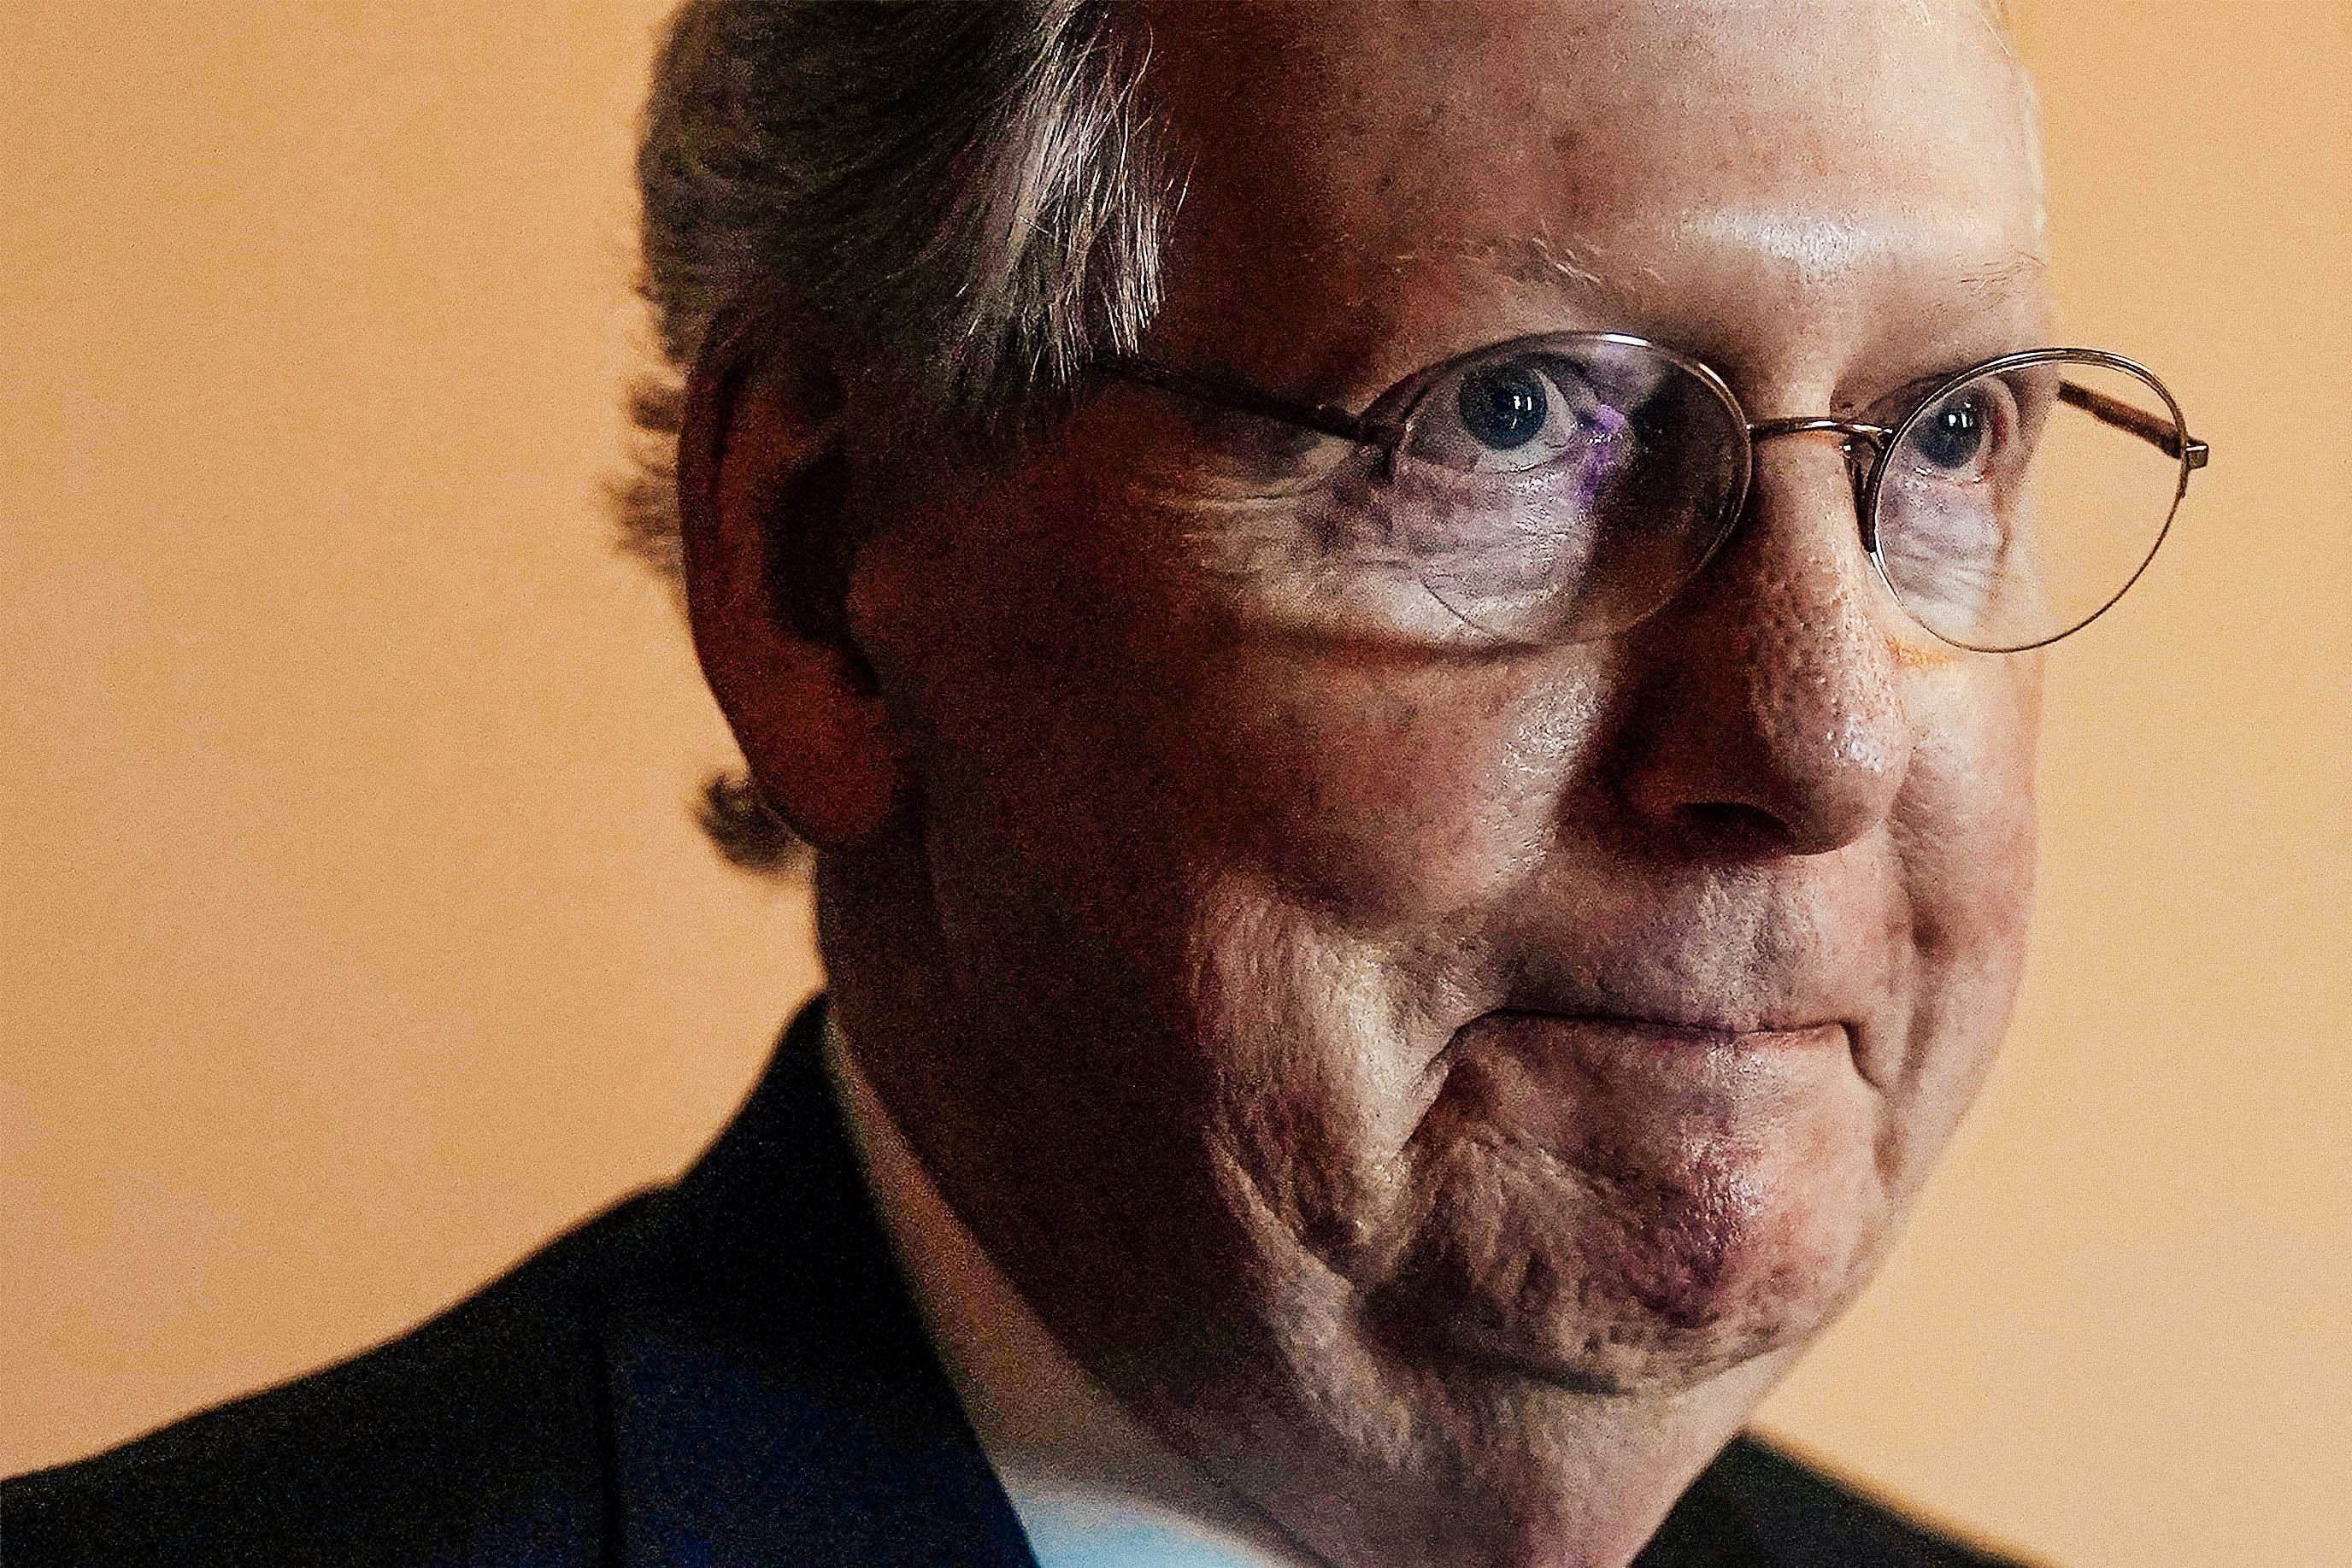 Alex Wong/Getty Images A close-up of Mitch McConnell.